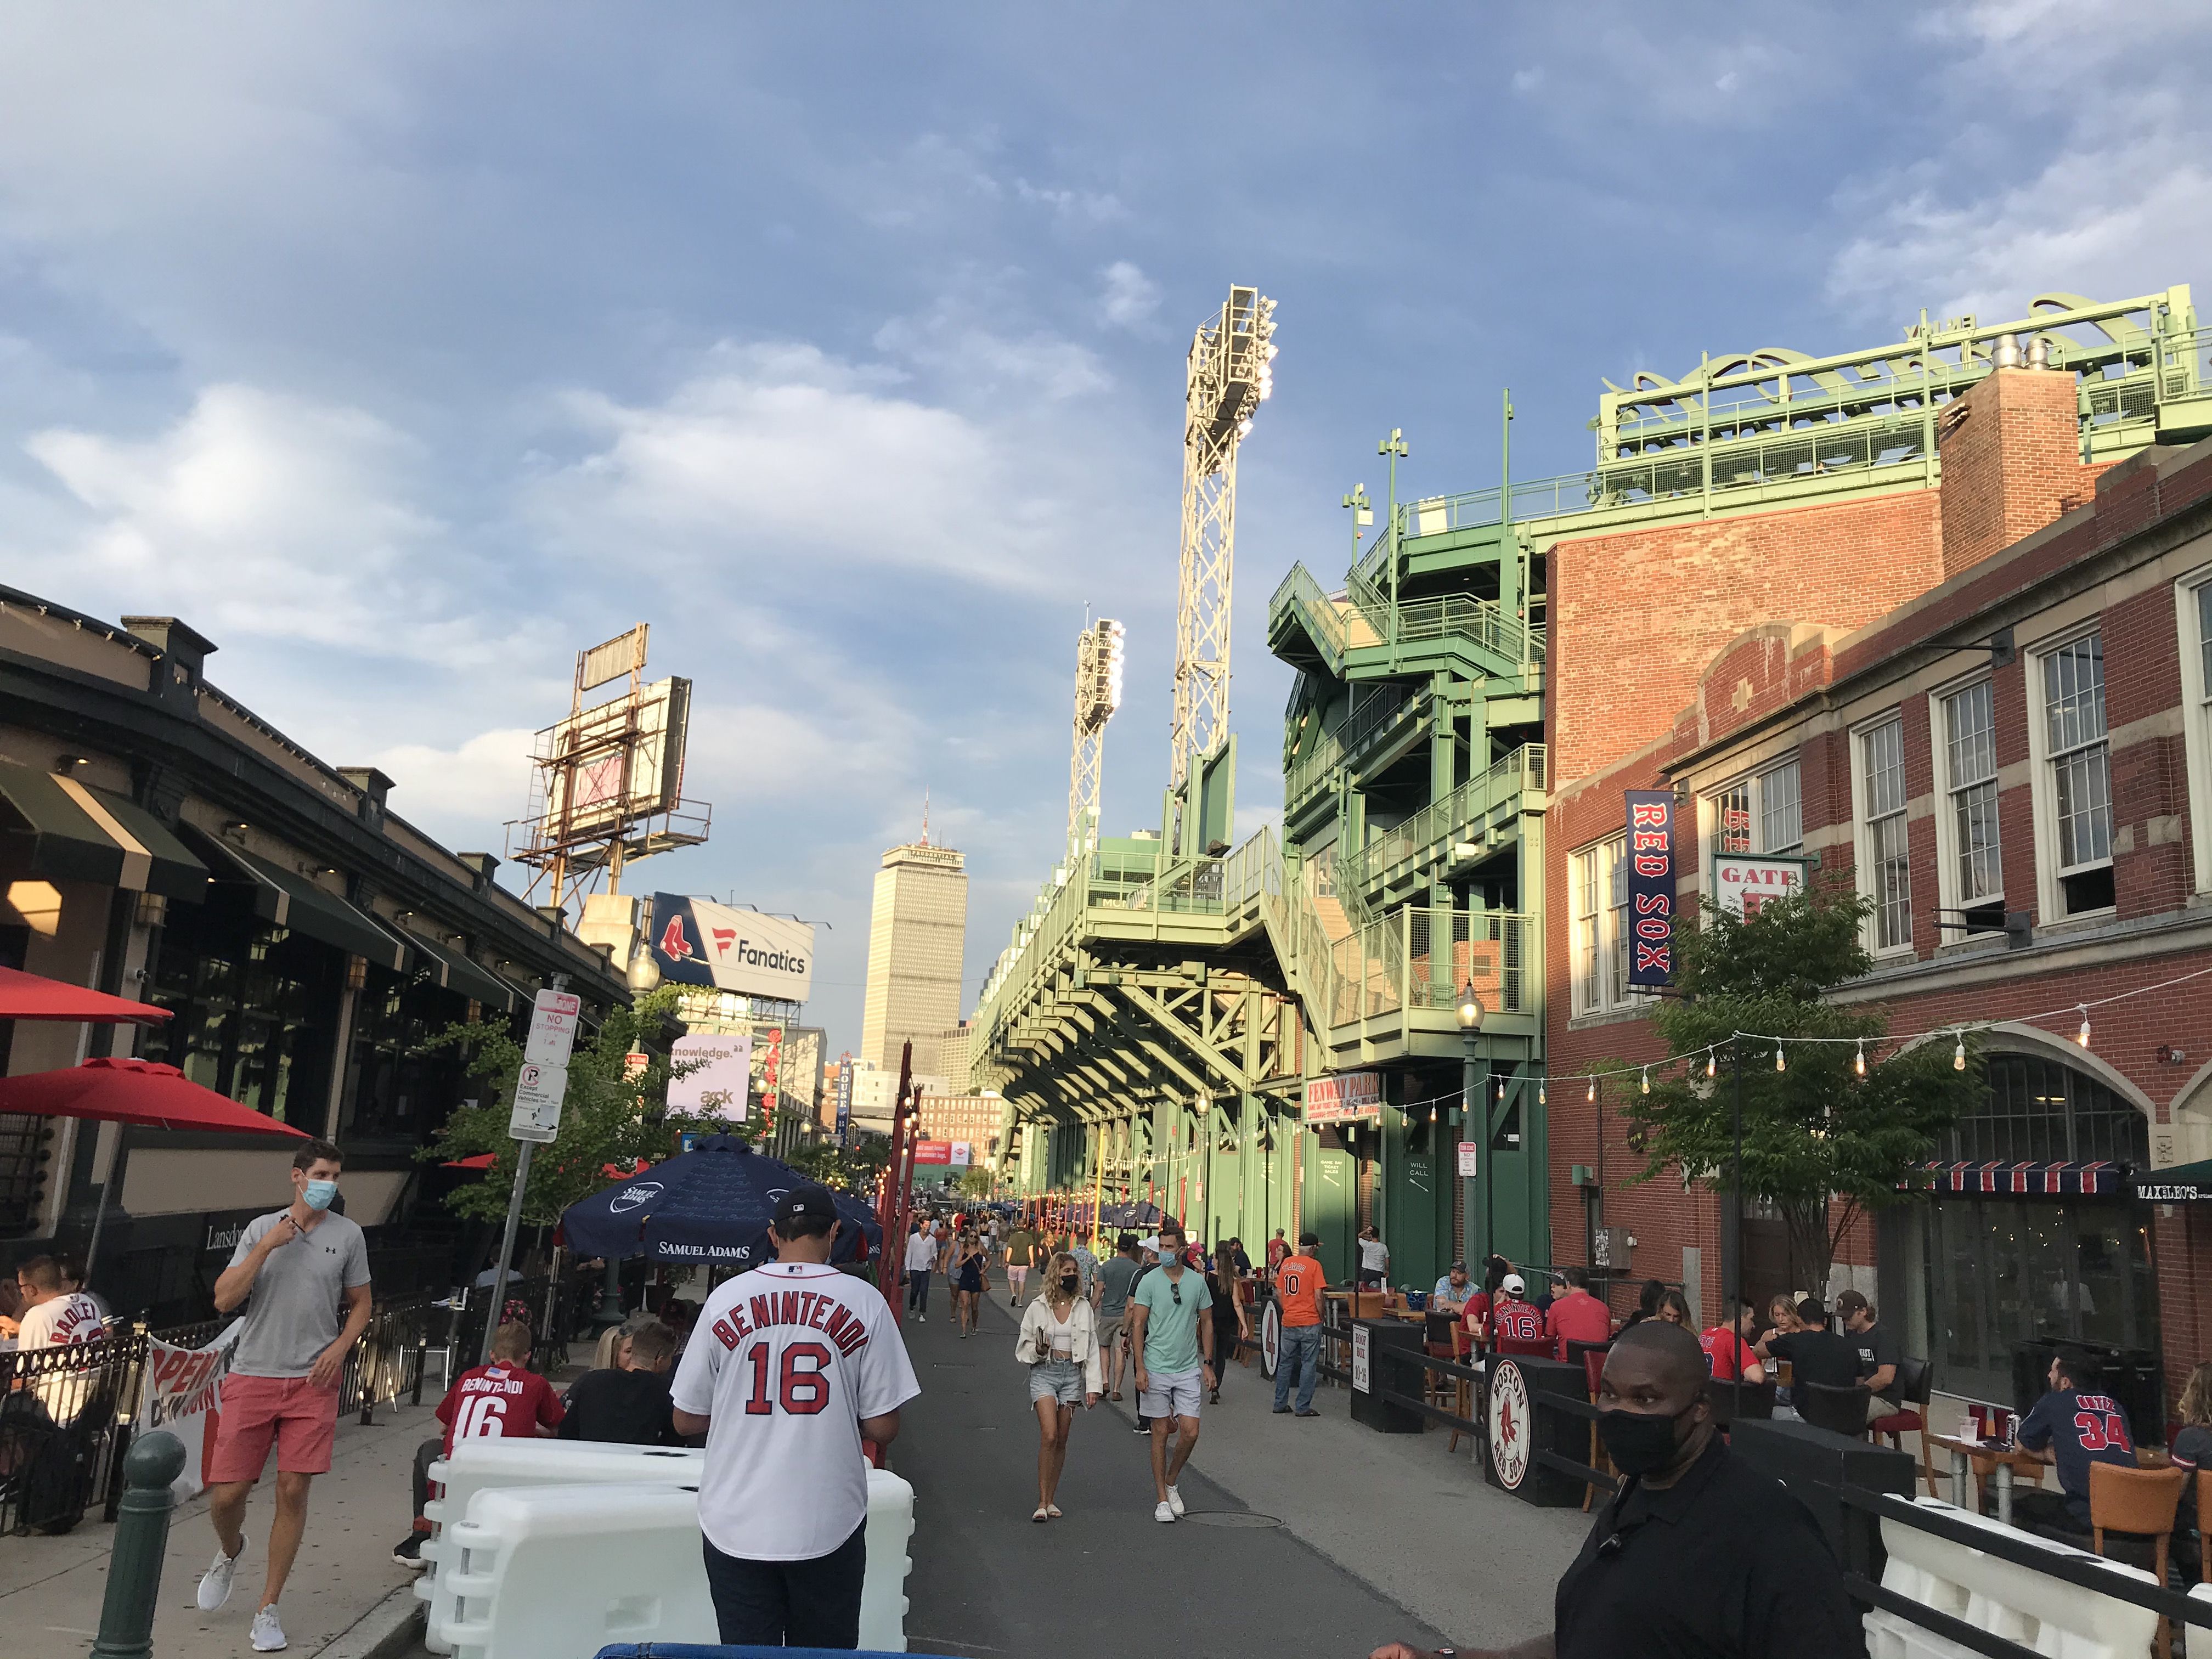 Red Sox Opening Day: With Fenway off limits, some fans welcomed